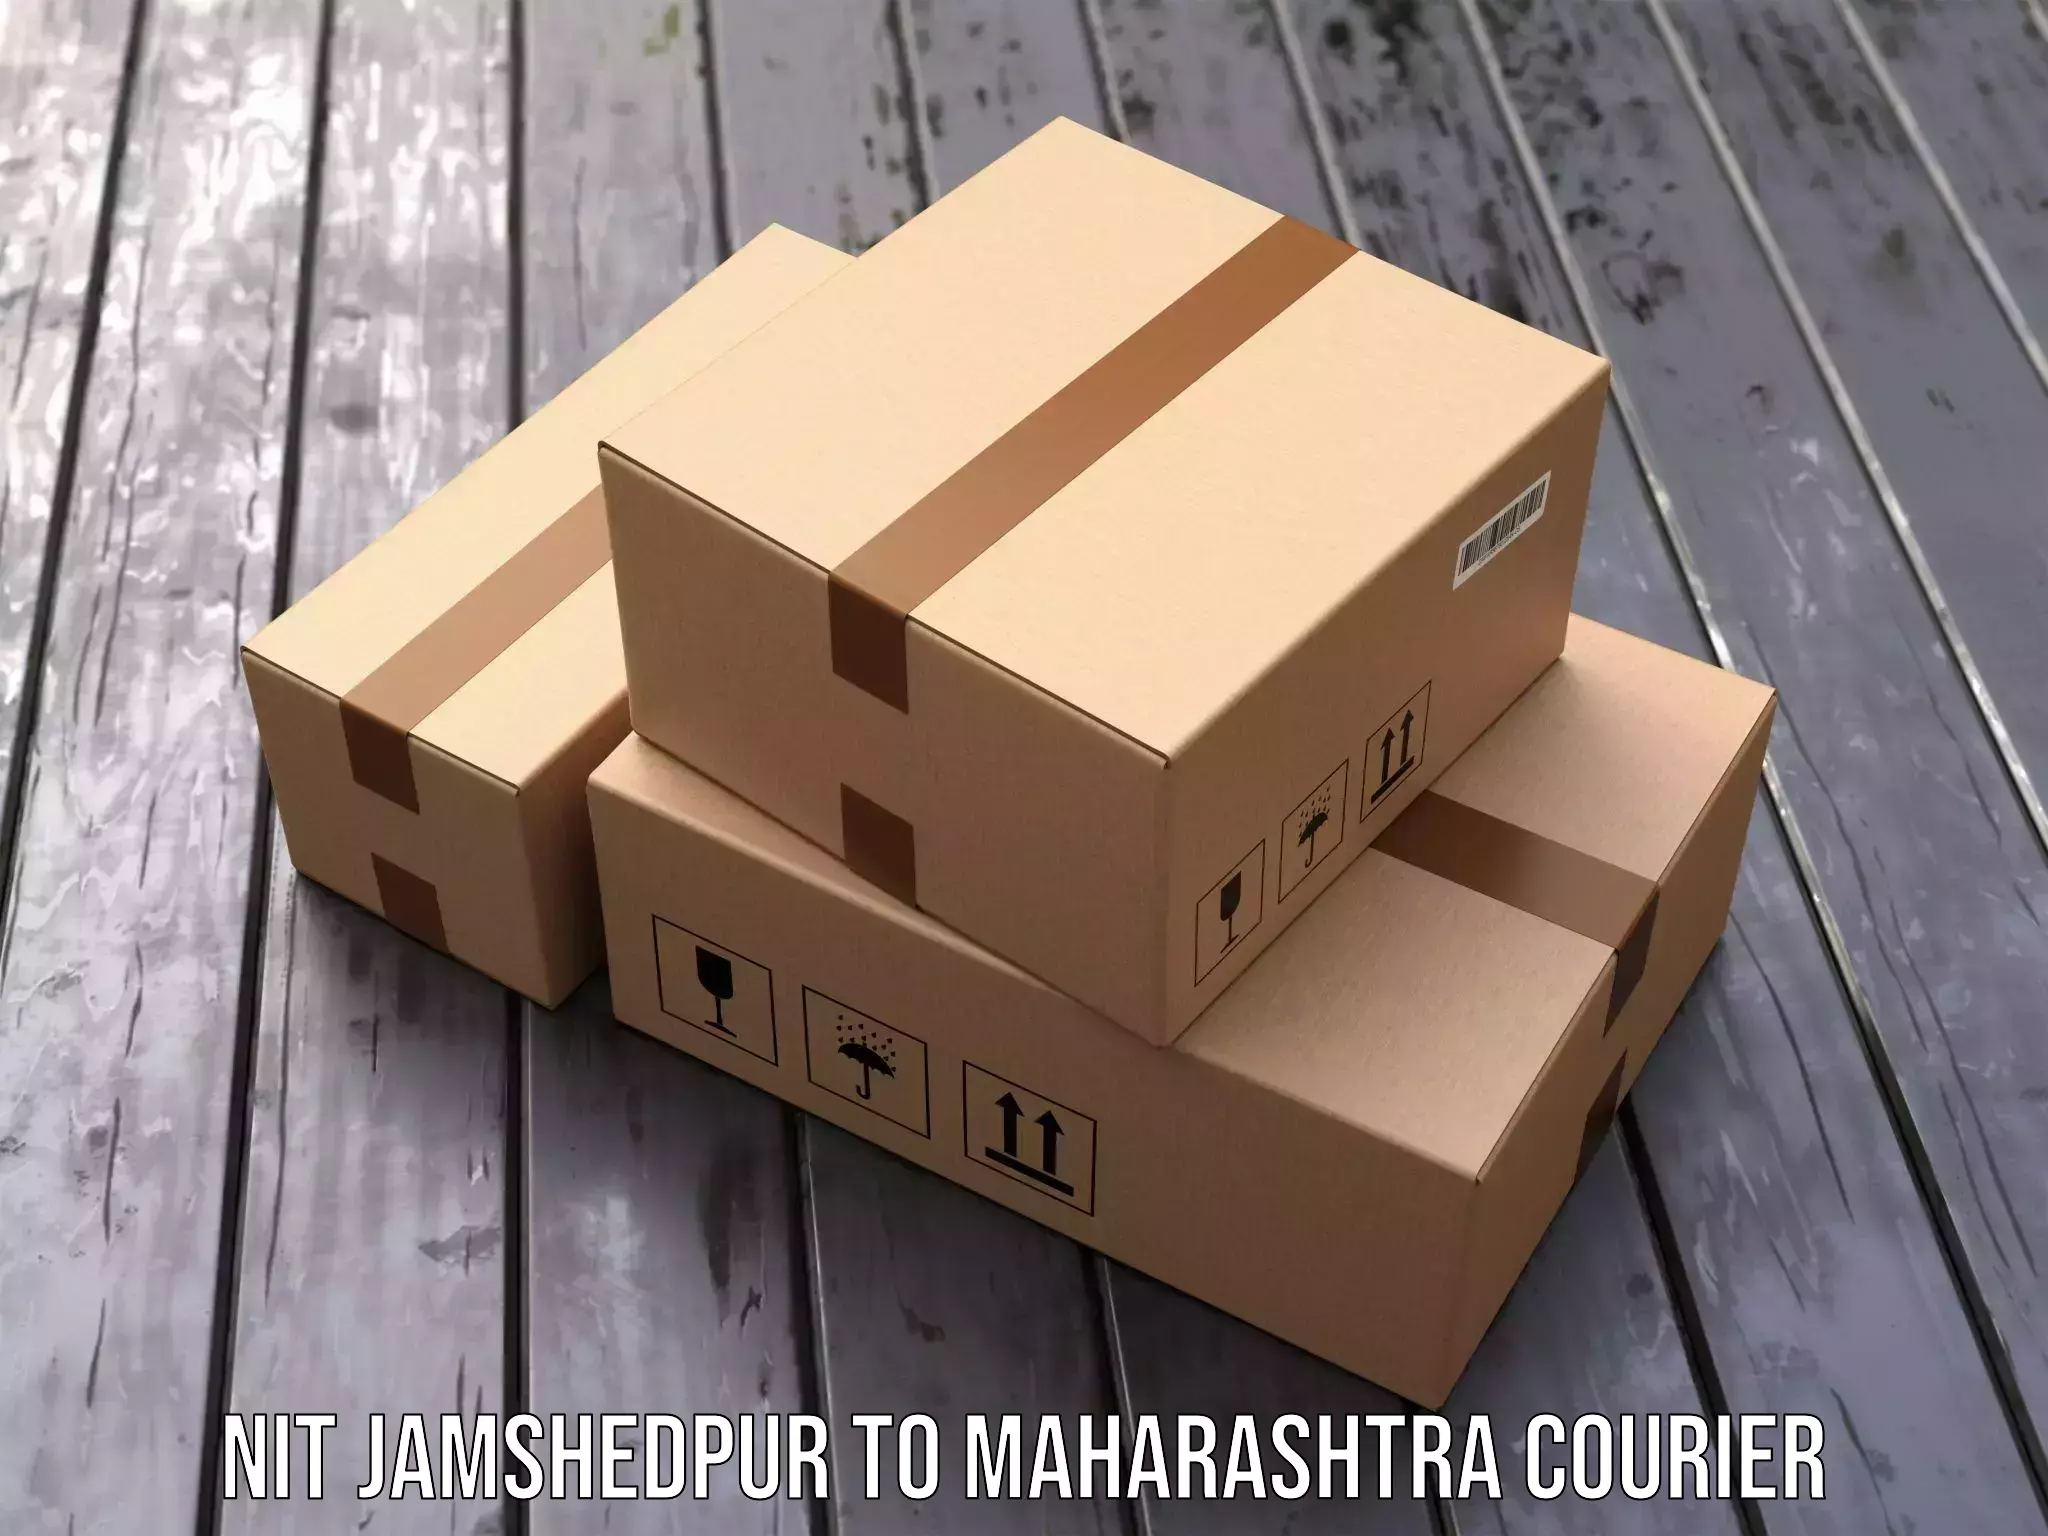 Corporate courier solutions NIT Jamshedpur to Khandala Pune